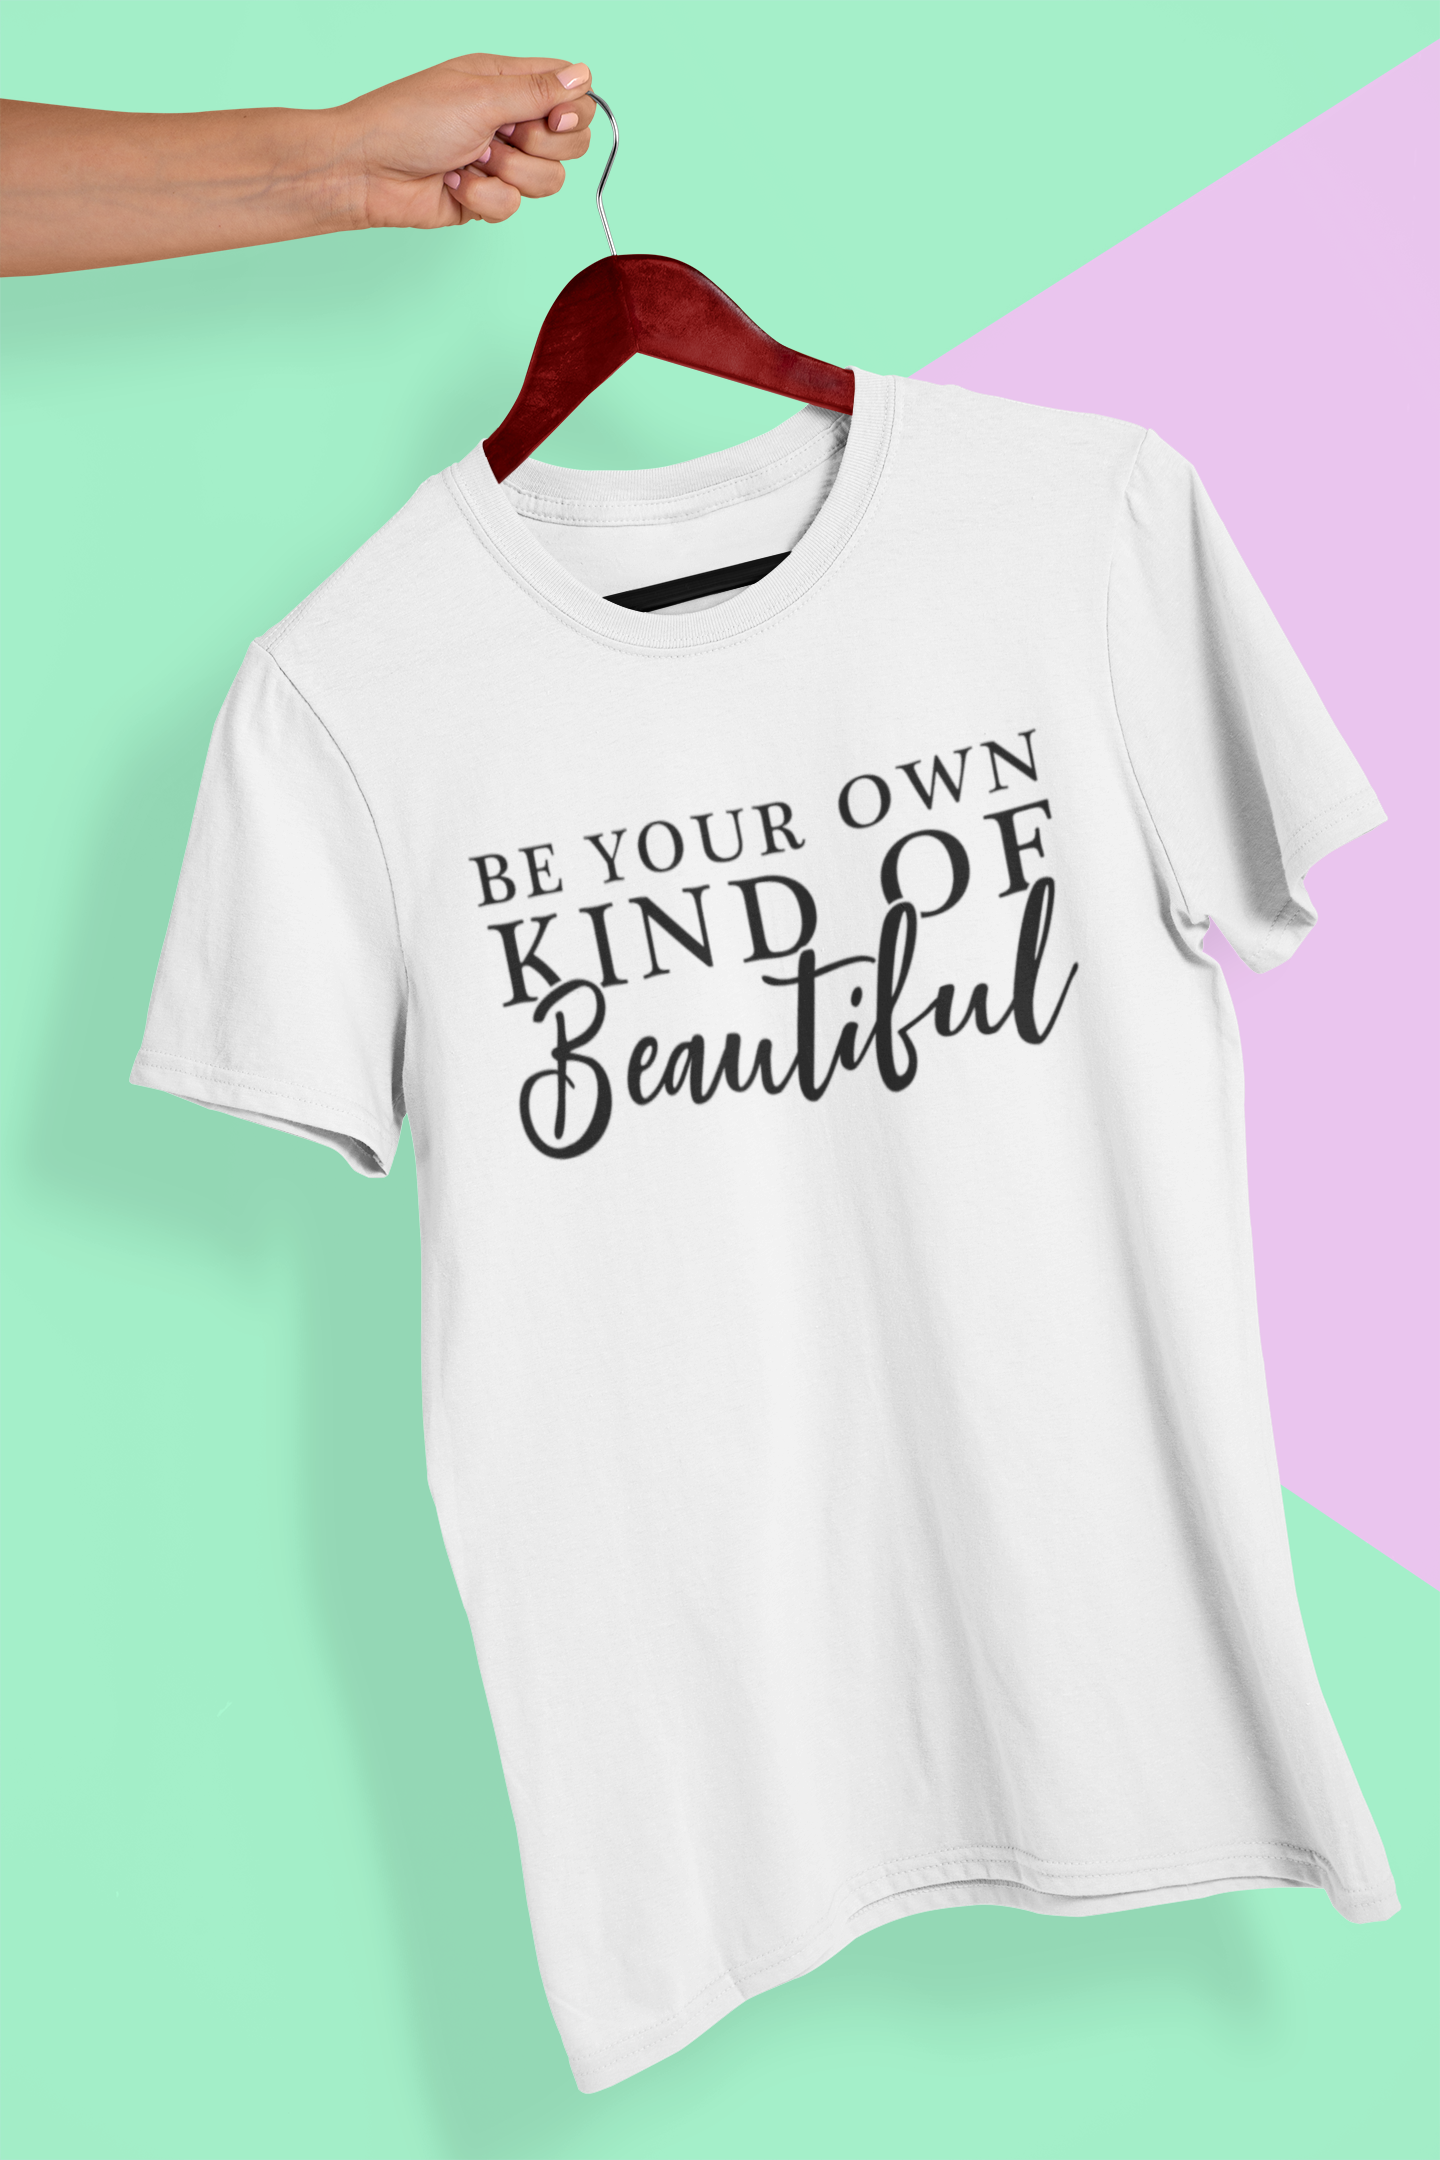 Be your own kind of Beautiful Graphic Tee